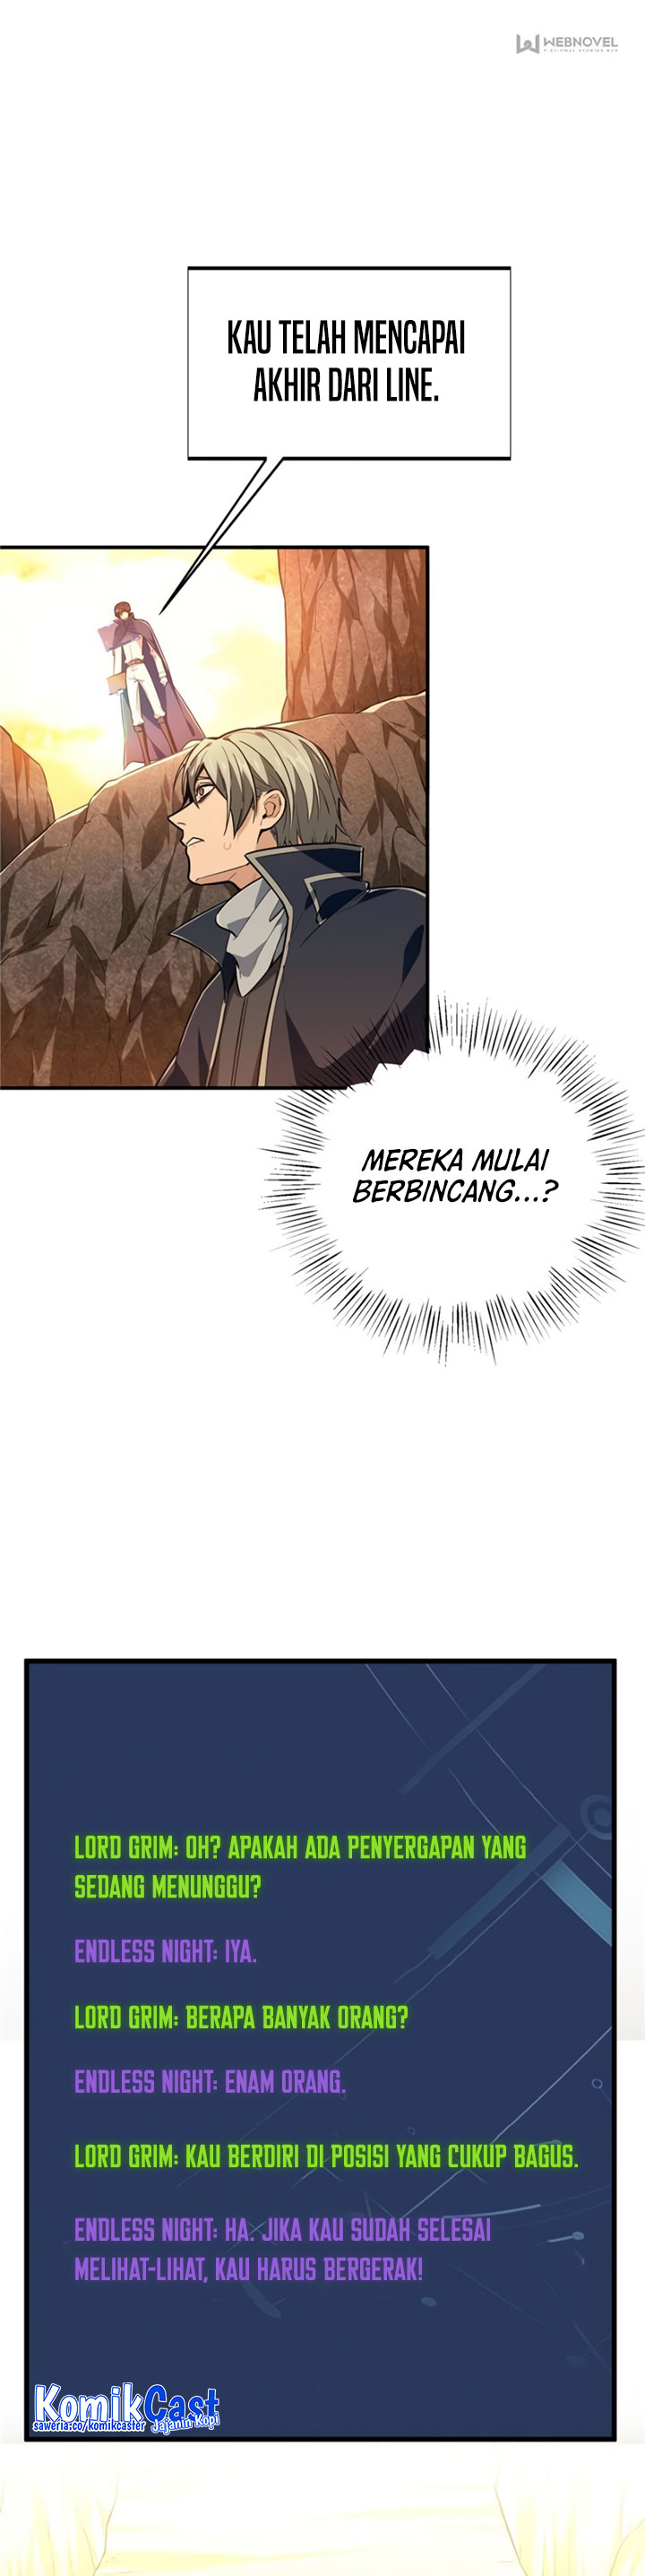 The King’s Avatar Chapter 99